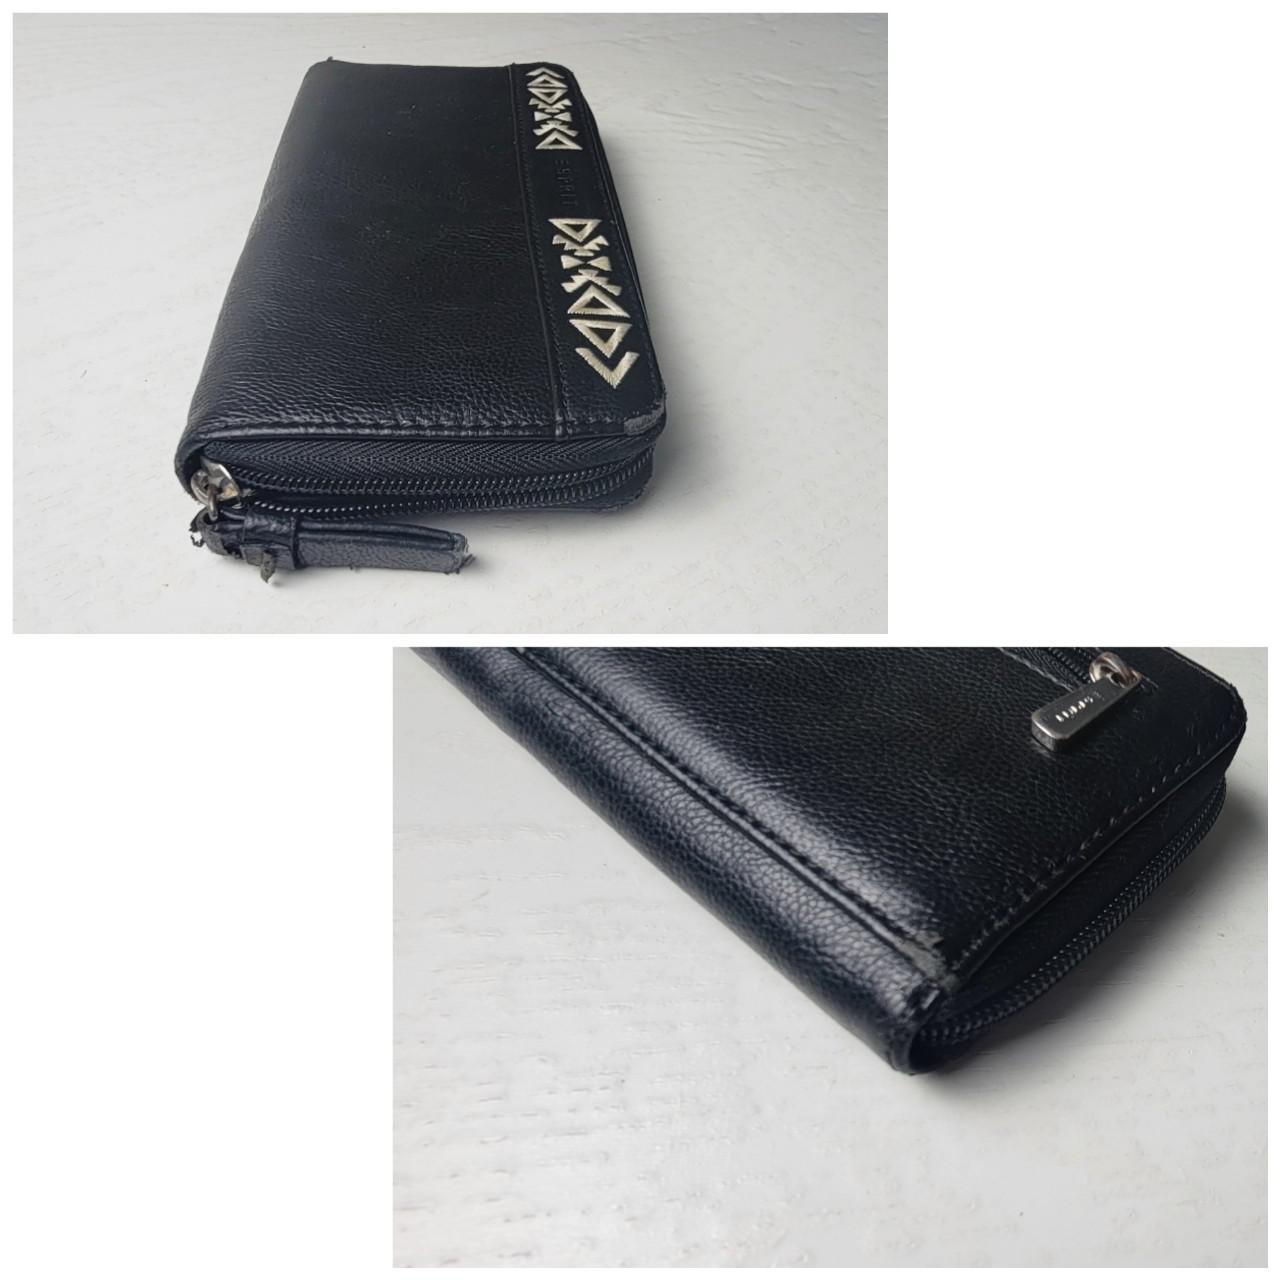 Product Image 4 - Esprit Wallet

Black Leather with white